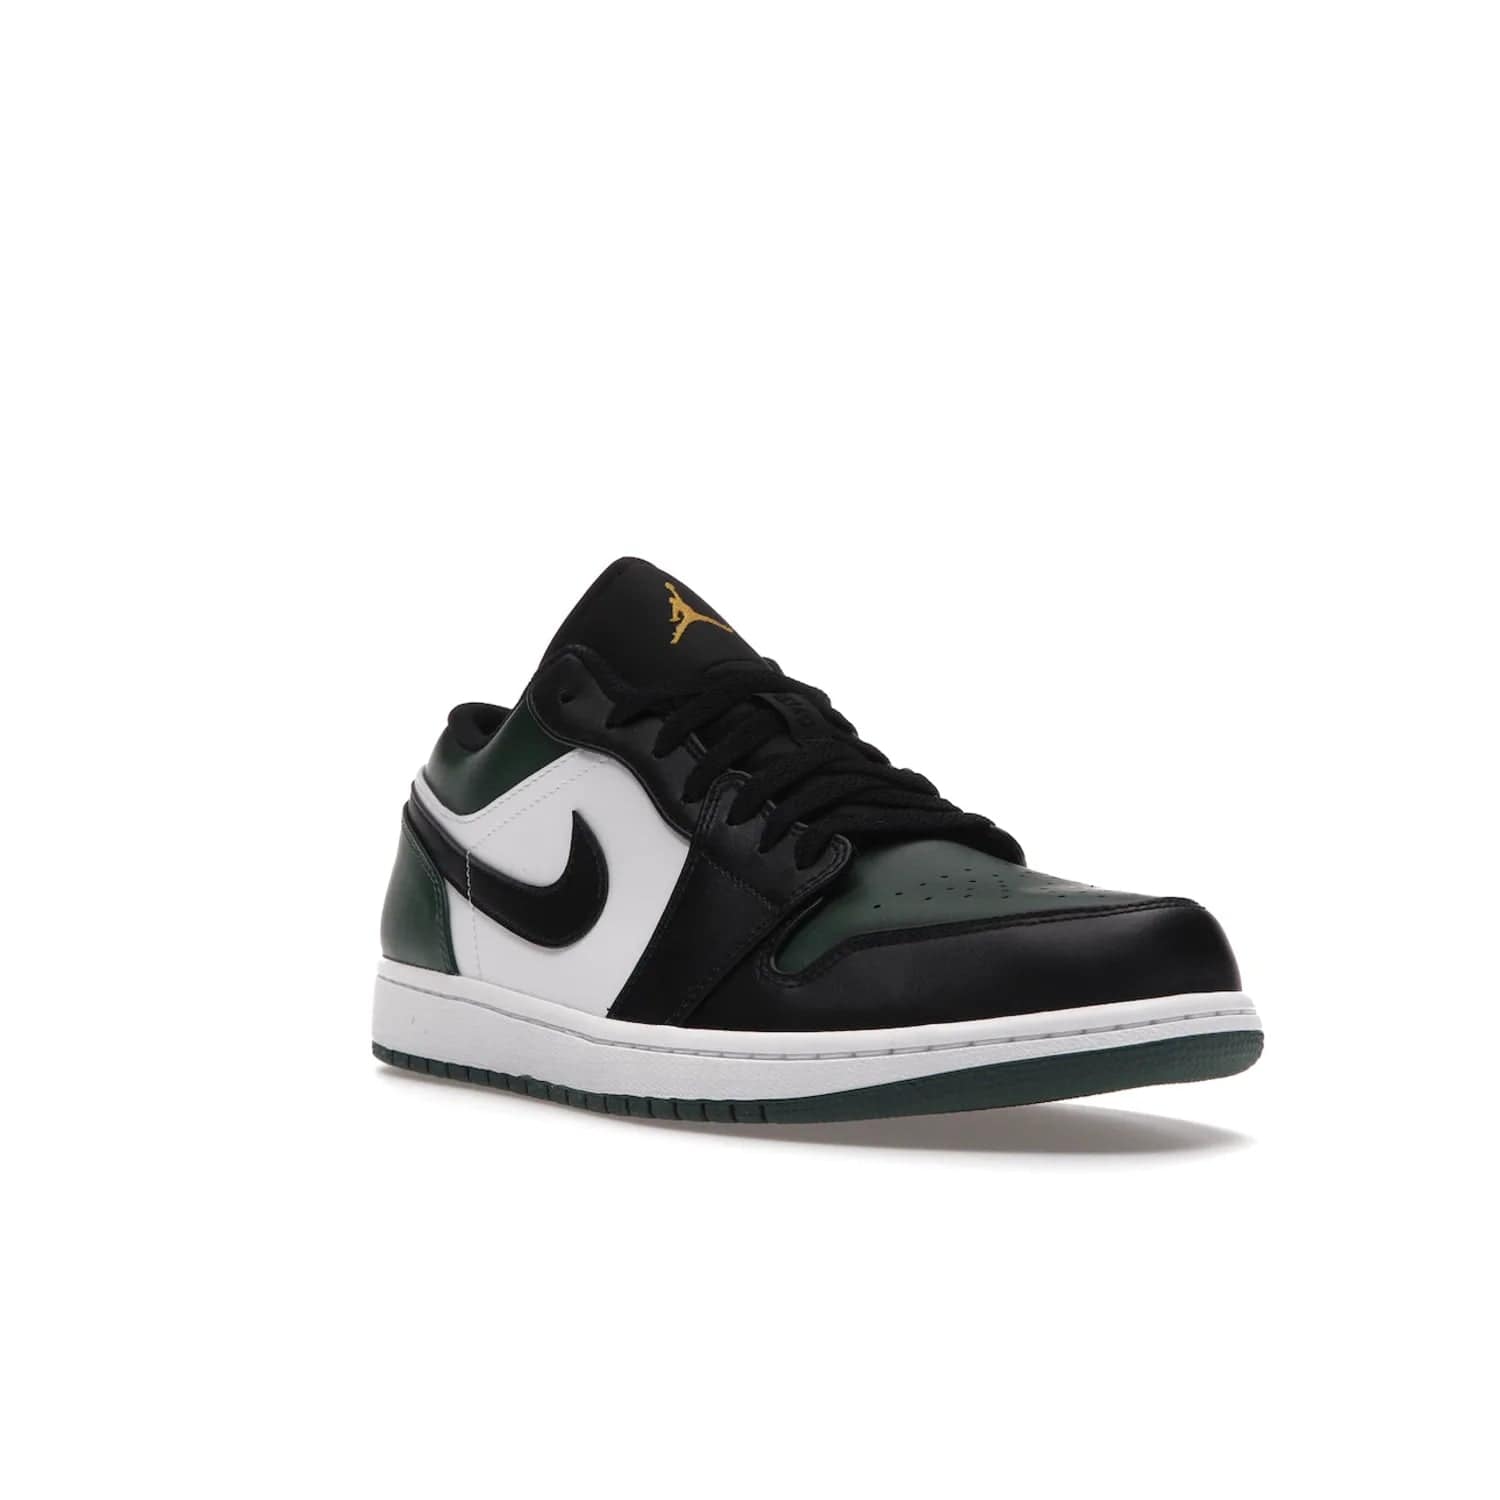 Jordan 1 Low Green Toe - Image 6 - Only at www.BallersClubKickz.com - The Jordan 1 Low Green Toe features white, black and Noble Green leather with black Swoosh. Get the classic Bred Toe-inspired color blocking with green perforated toe box. White and green Air sole completes the design. Released in October 2021 at only $100. Grab your pair now!